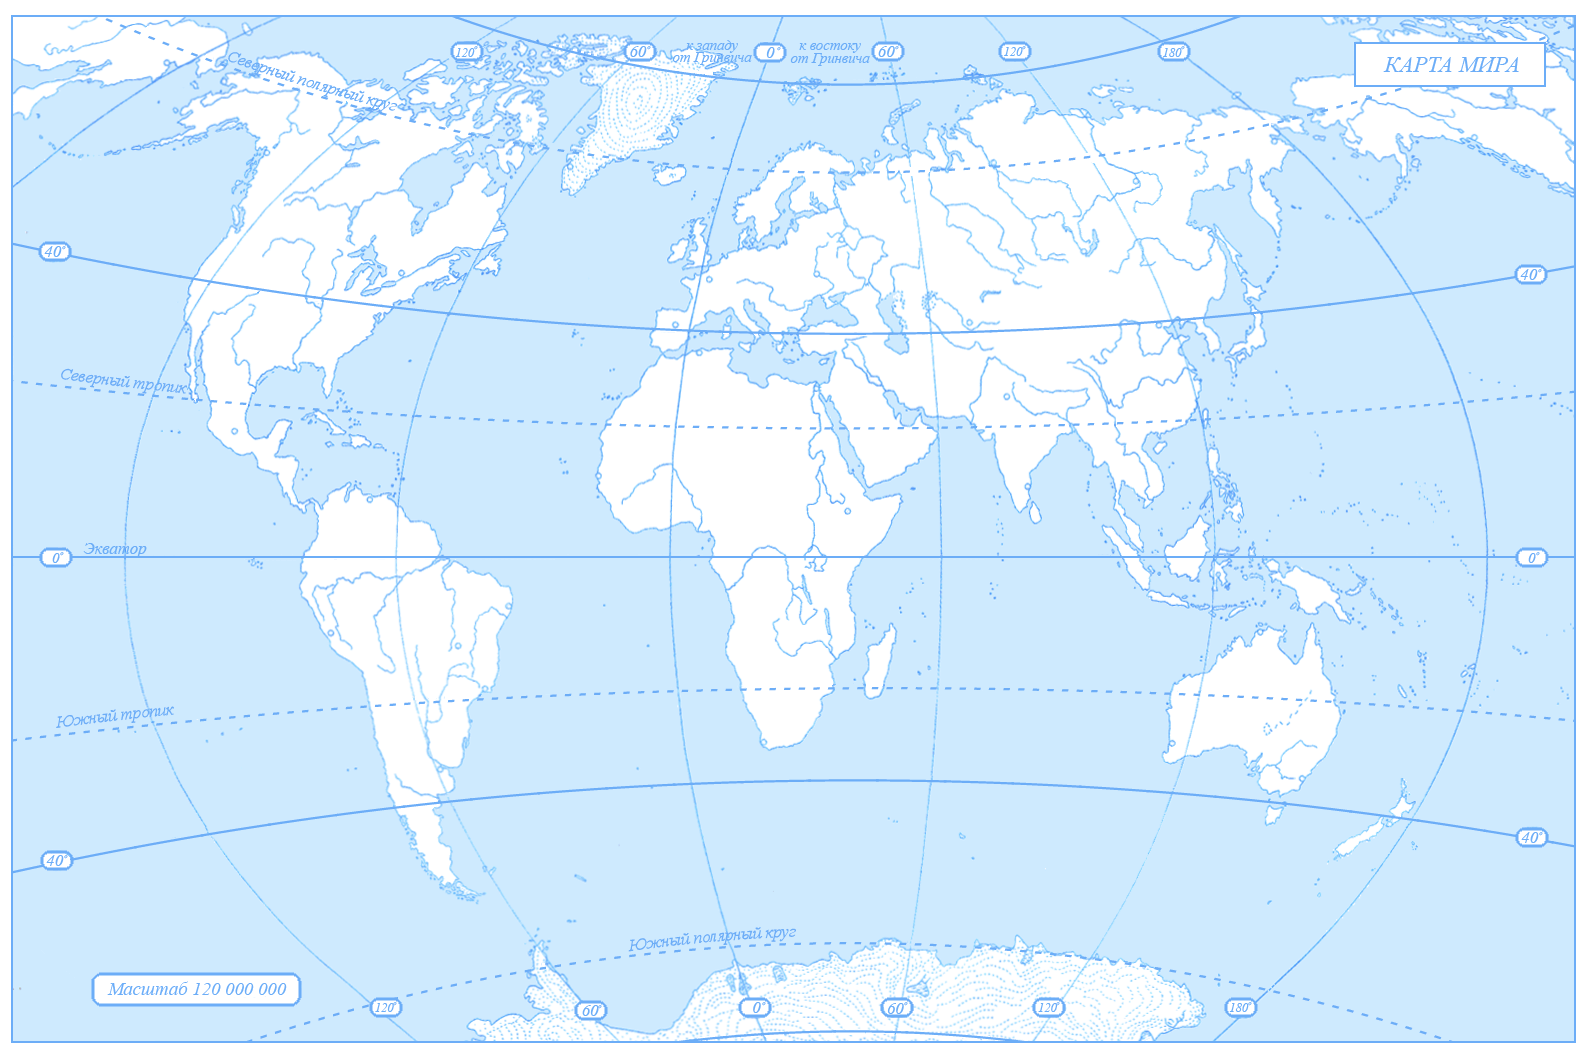 Contour map of the world